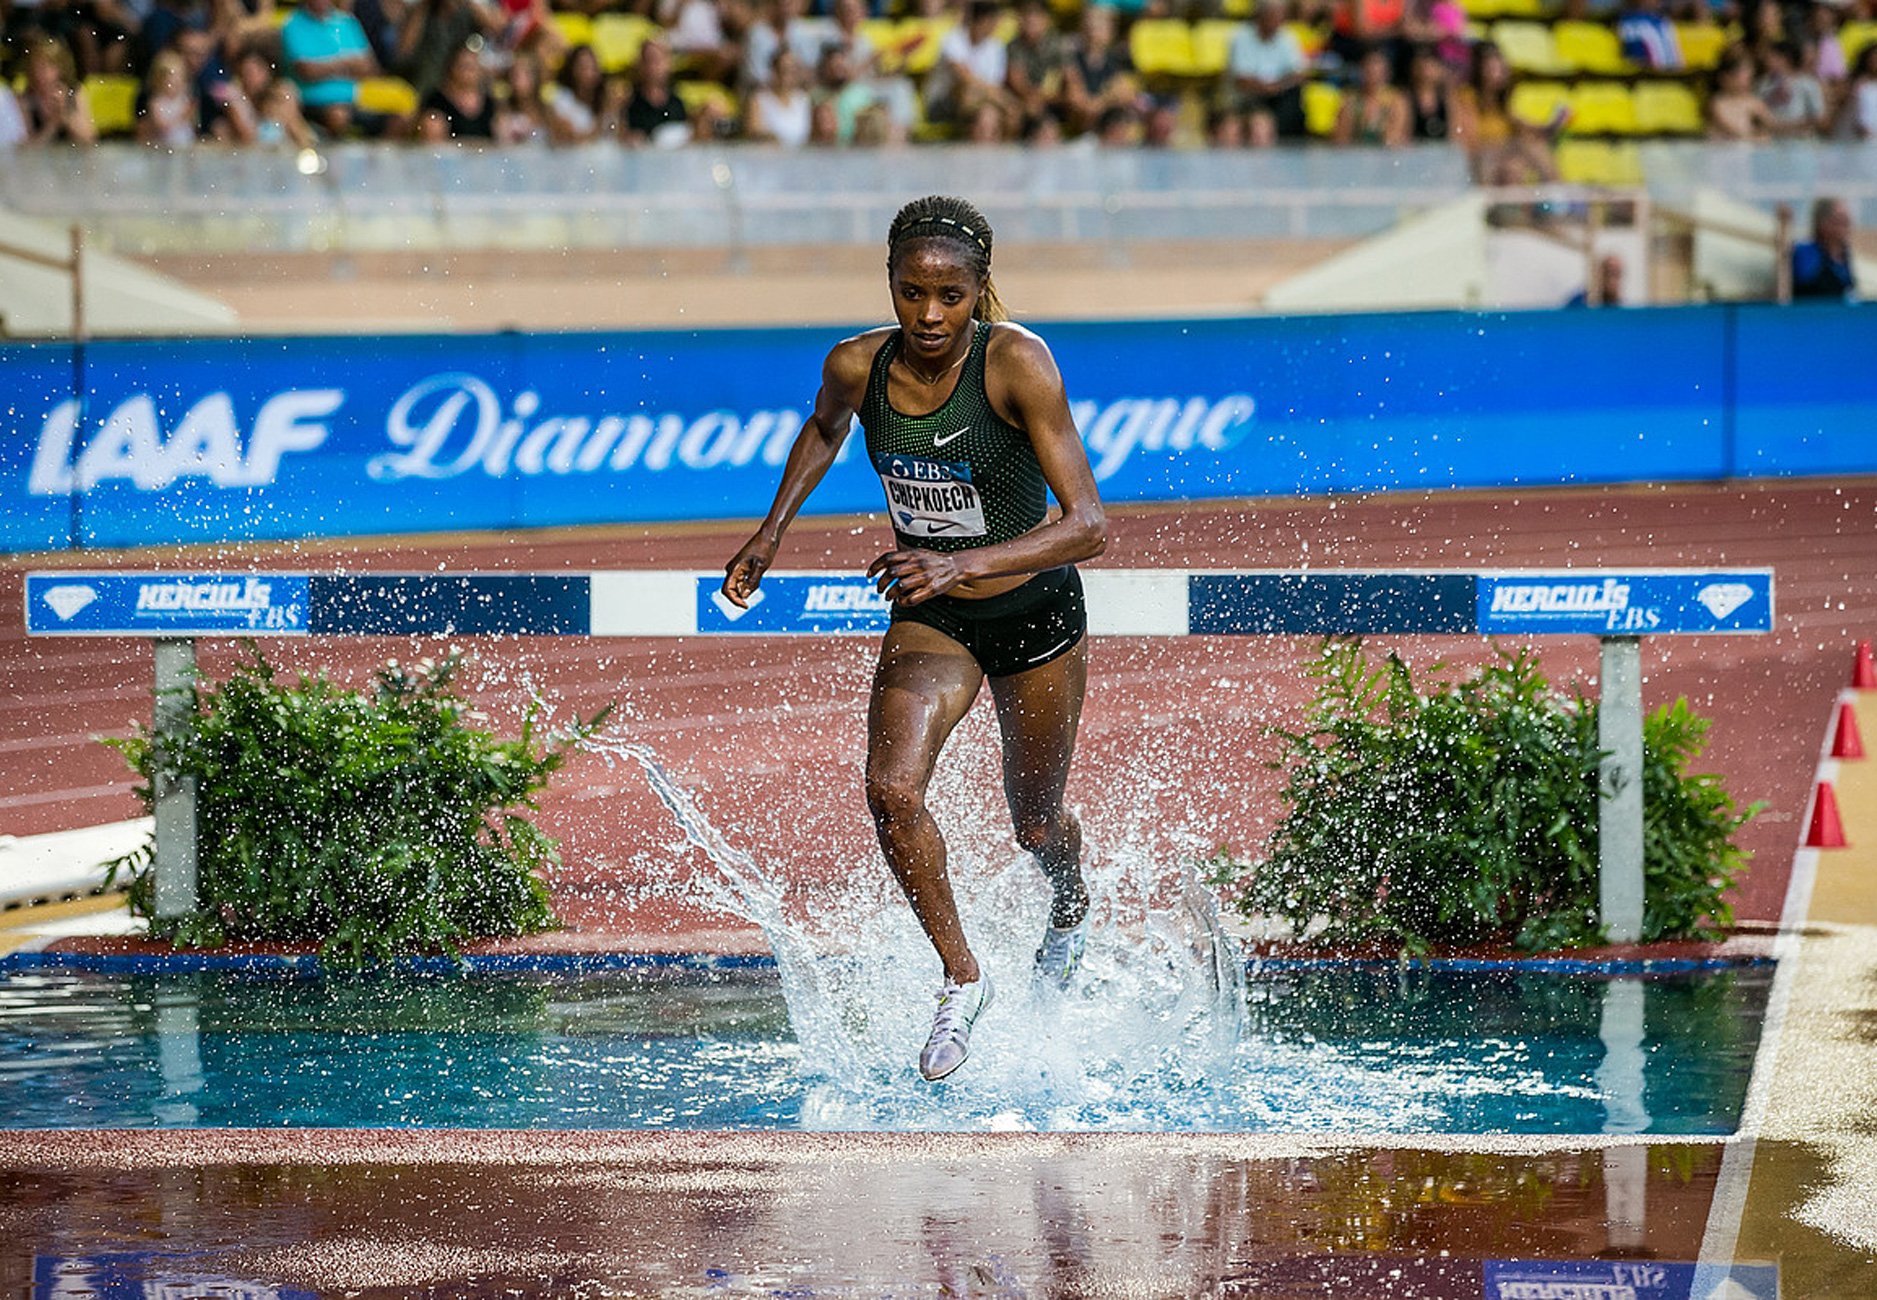 Beatrice Chepkoech (Kenya) on her way to winning the steeplechase at the IAAF Diamond League meeting in Monaco (Philippe Fitte)